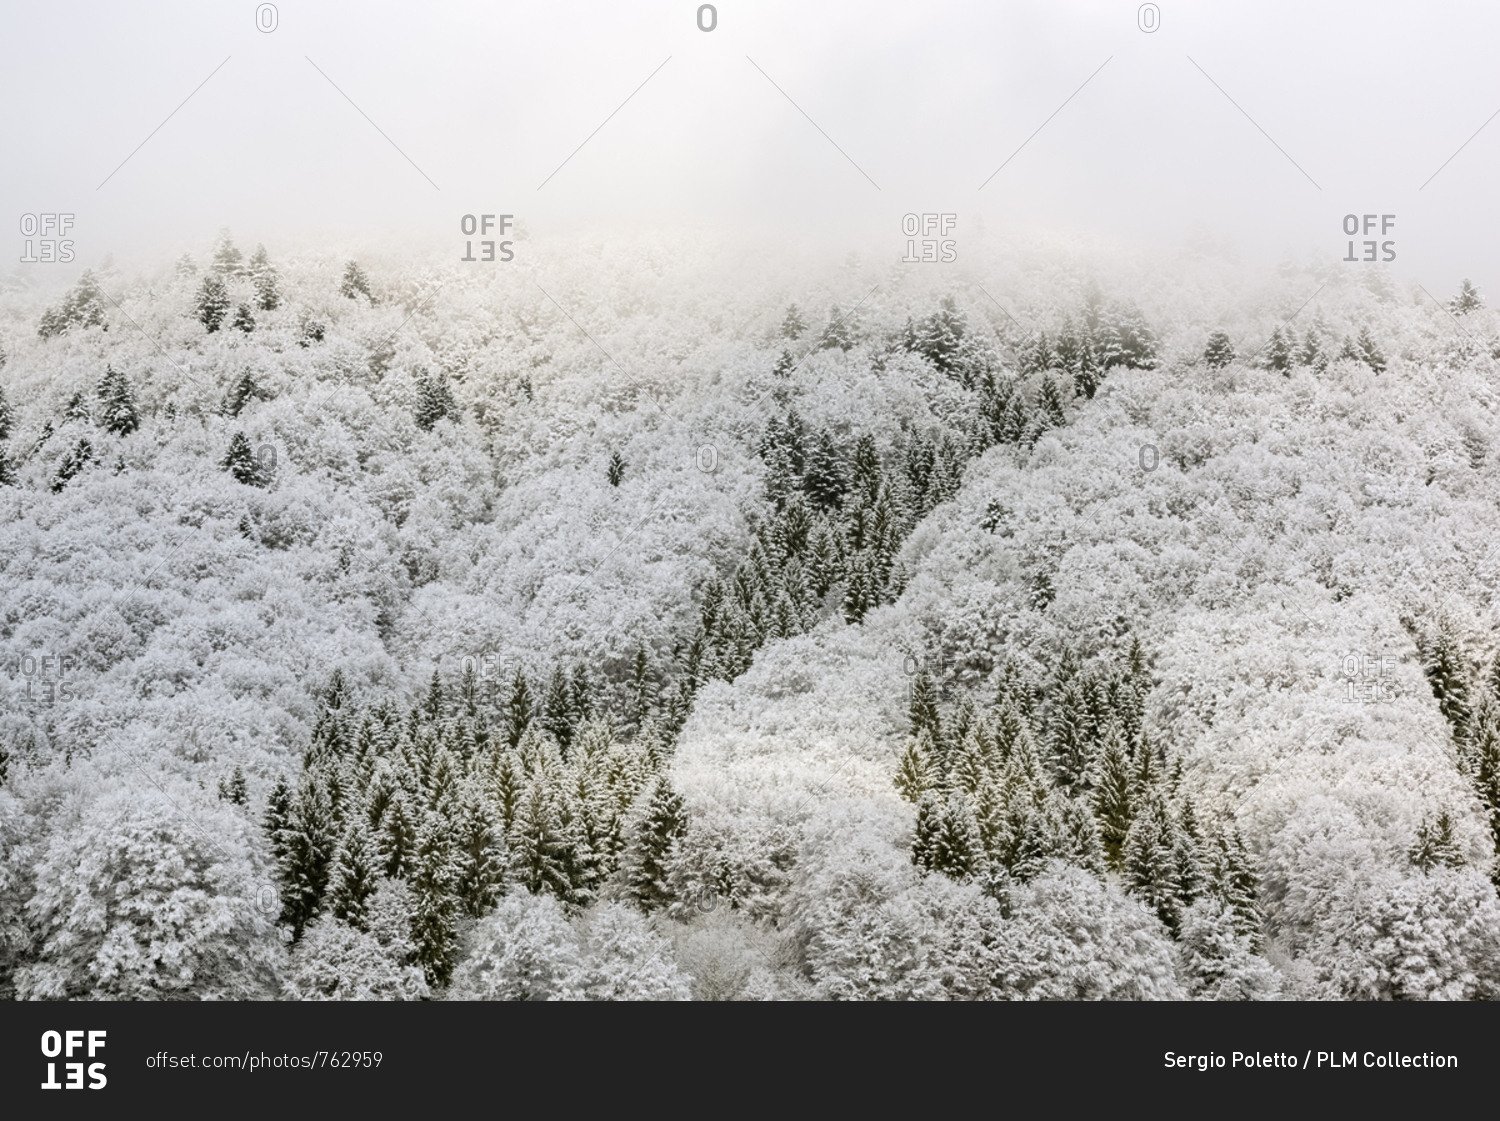 Winter in the Cansiglio Forest, Italy. The previous night, a light snowfall accompanied by intense cold crystallized the ice even on the smallest sprig. At dawn the fog swept fast through the folds of the wood by adding magic to magic. For short moments t